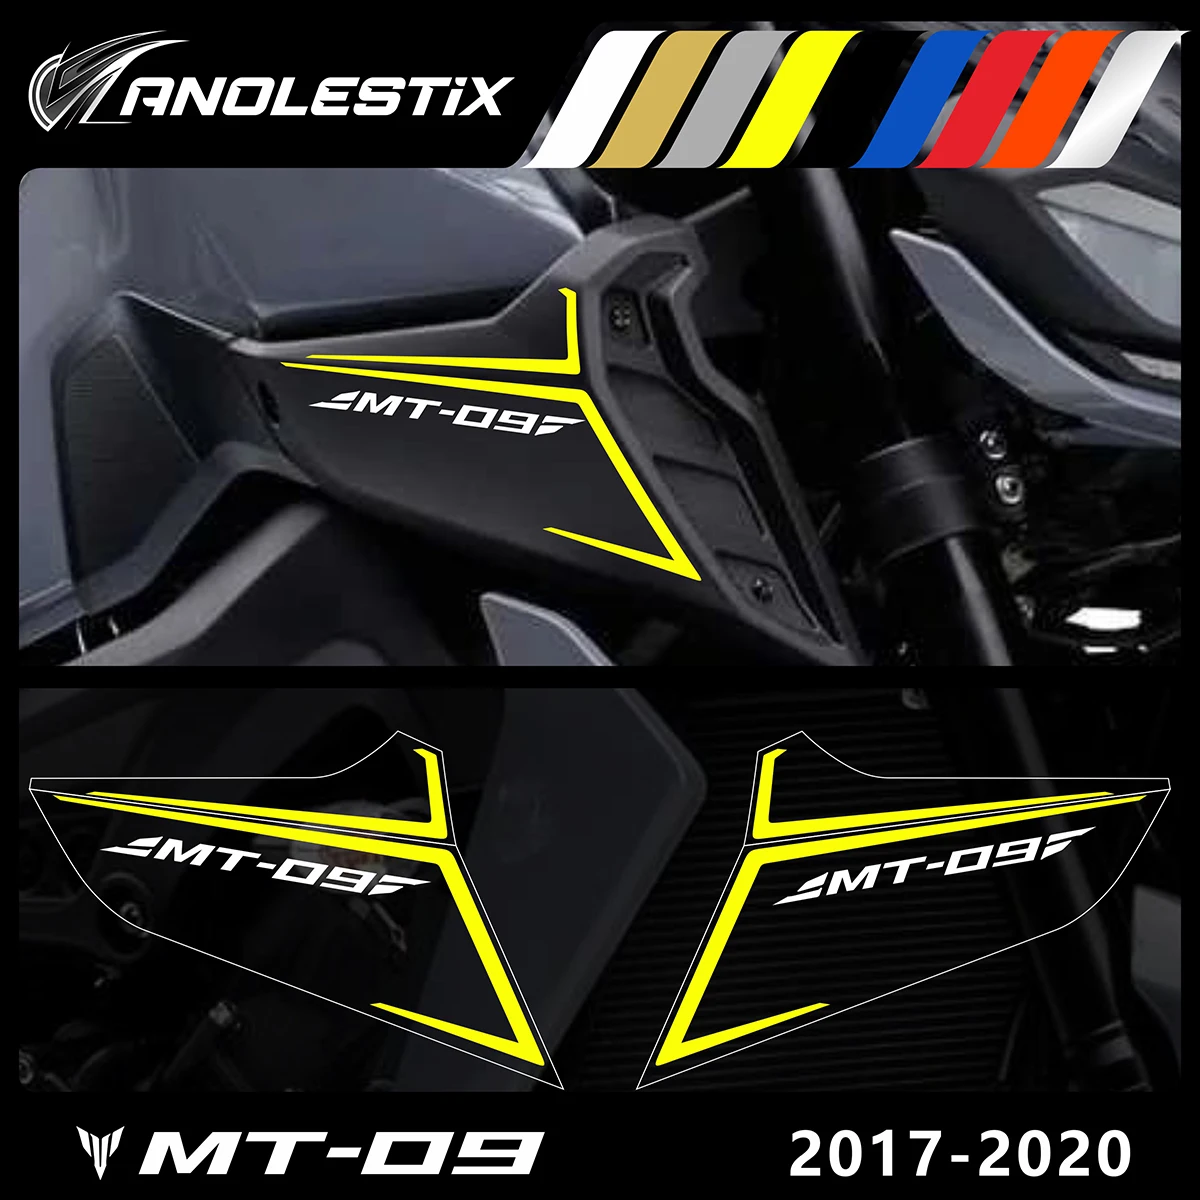 AnoleStix Reflective Motorcycle Stickers Air Intake Side Cover Decals Set For YAMAHA MT09 MT-09 SP 2017 2018 2019 2020 jl1170 car air intake snorkel system kit for jeep parts jl 2018